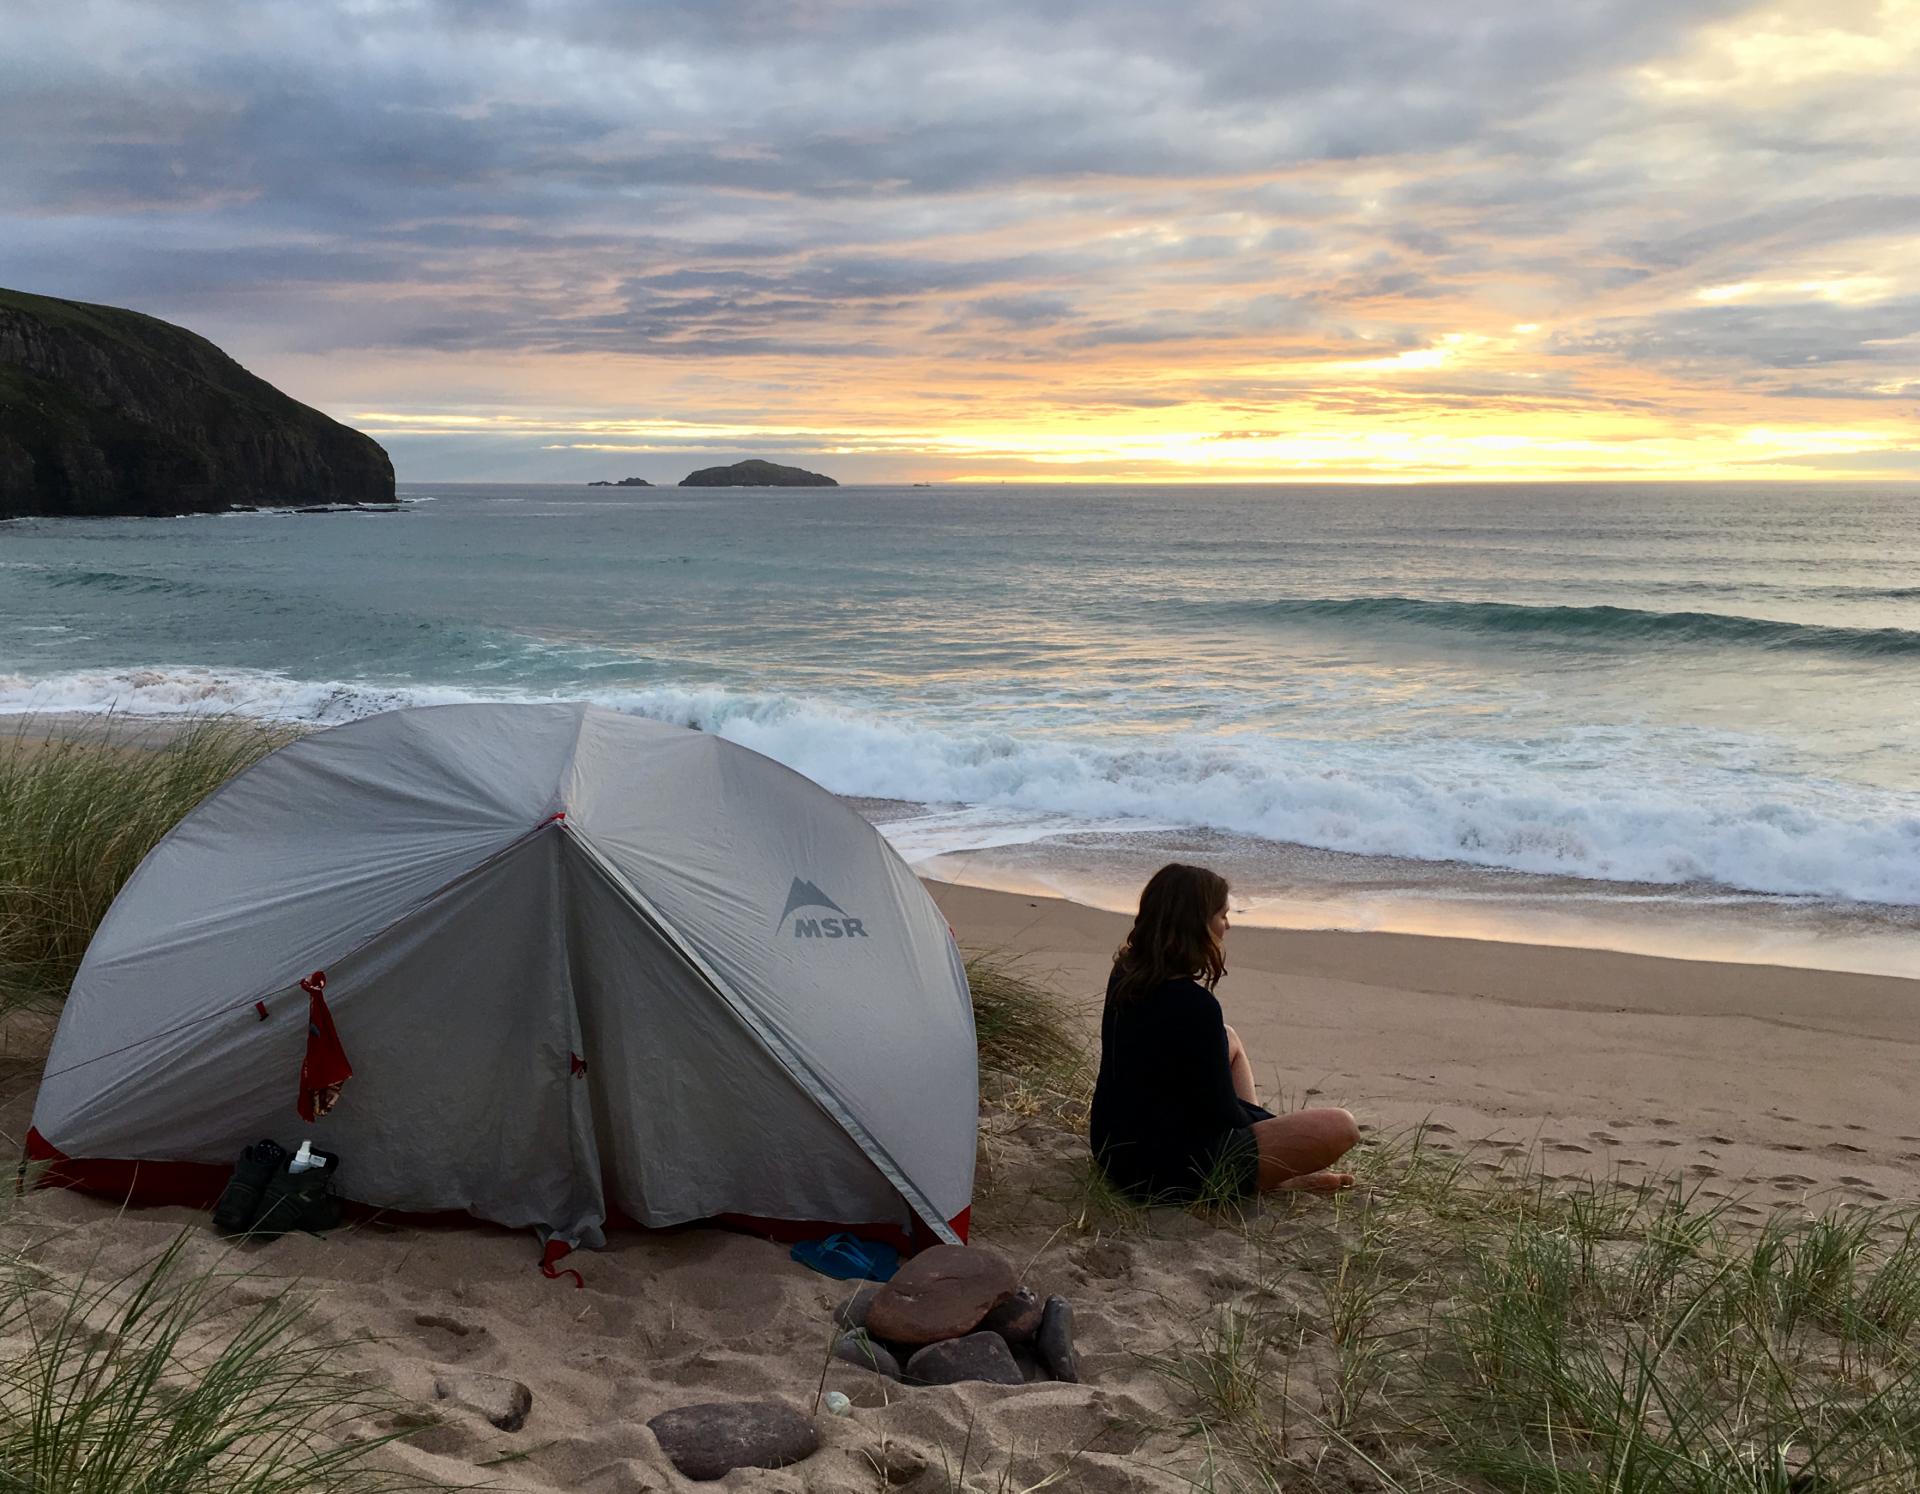 Wild camping: finding the confidence to go solo